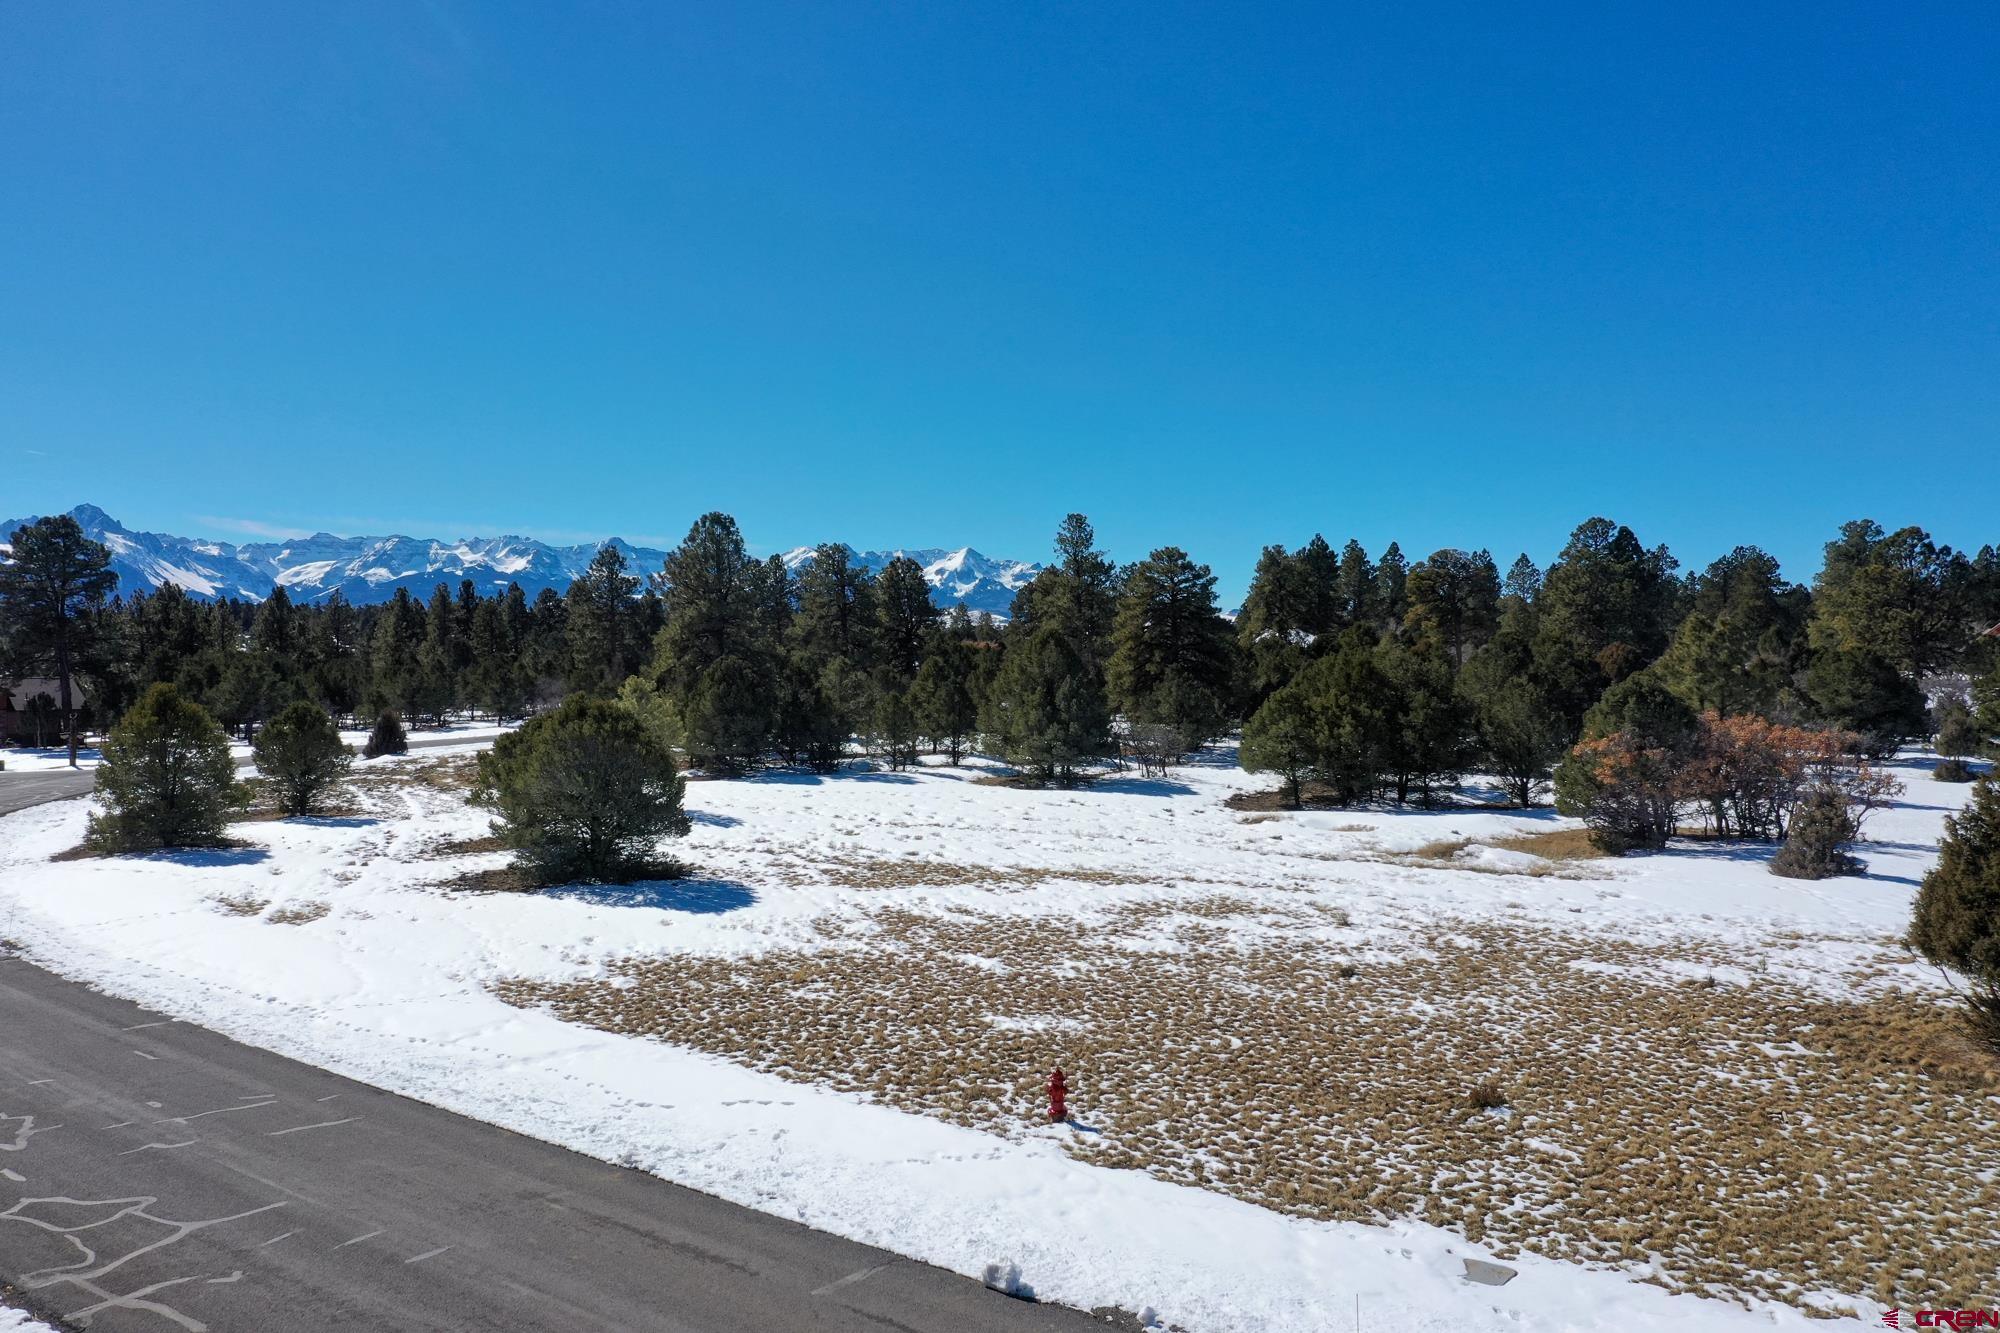 This is a spectacular property to build your dream home - 1 acre lot is located in the golf course community of The Divide Ranch.  Views of the San Juan and Cimarron Mountain ranges can be seen from ground level, with even greater views from a 2 story home.  The property does backs up to the 7th fairway, therefore no one can build directly behind you.  Ease into the country club lifestyle with this amazing golf course view.  The annual Founders Membership is $1,600+ annually and is subject to change. Buyer to pay $3,000 membership transfer fee.